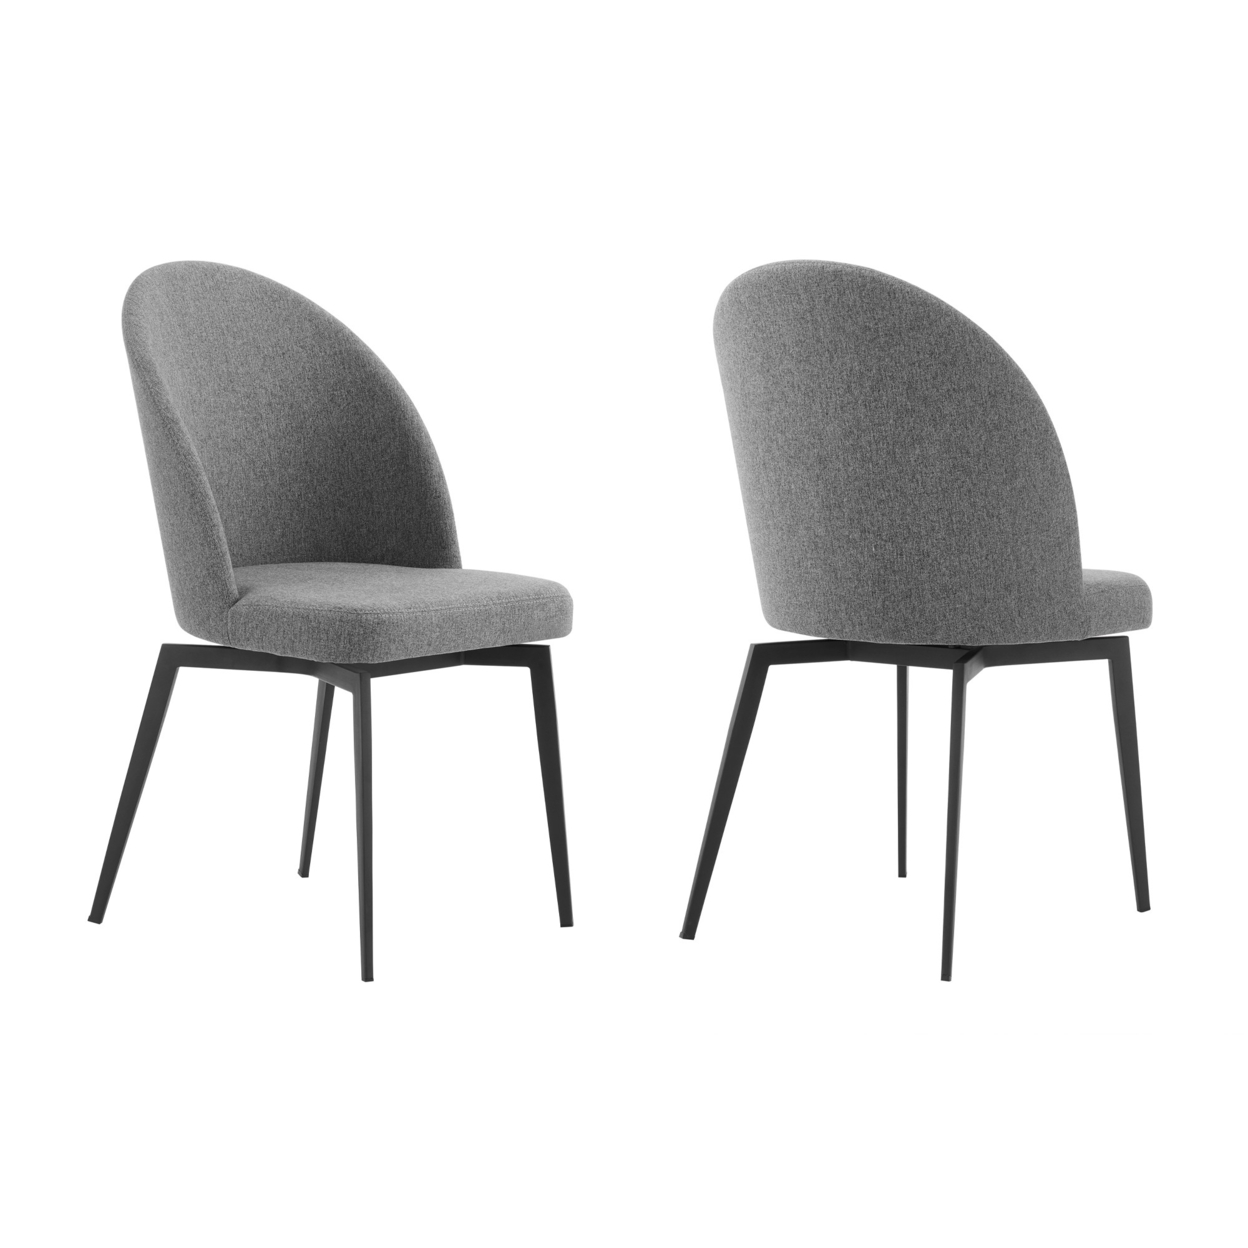 Swivel Fabric Dining Chair With Curved Backrest, Set Of 2, Gray- Saltoro Sherpi